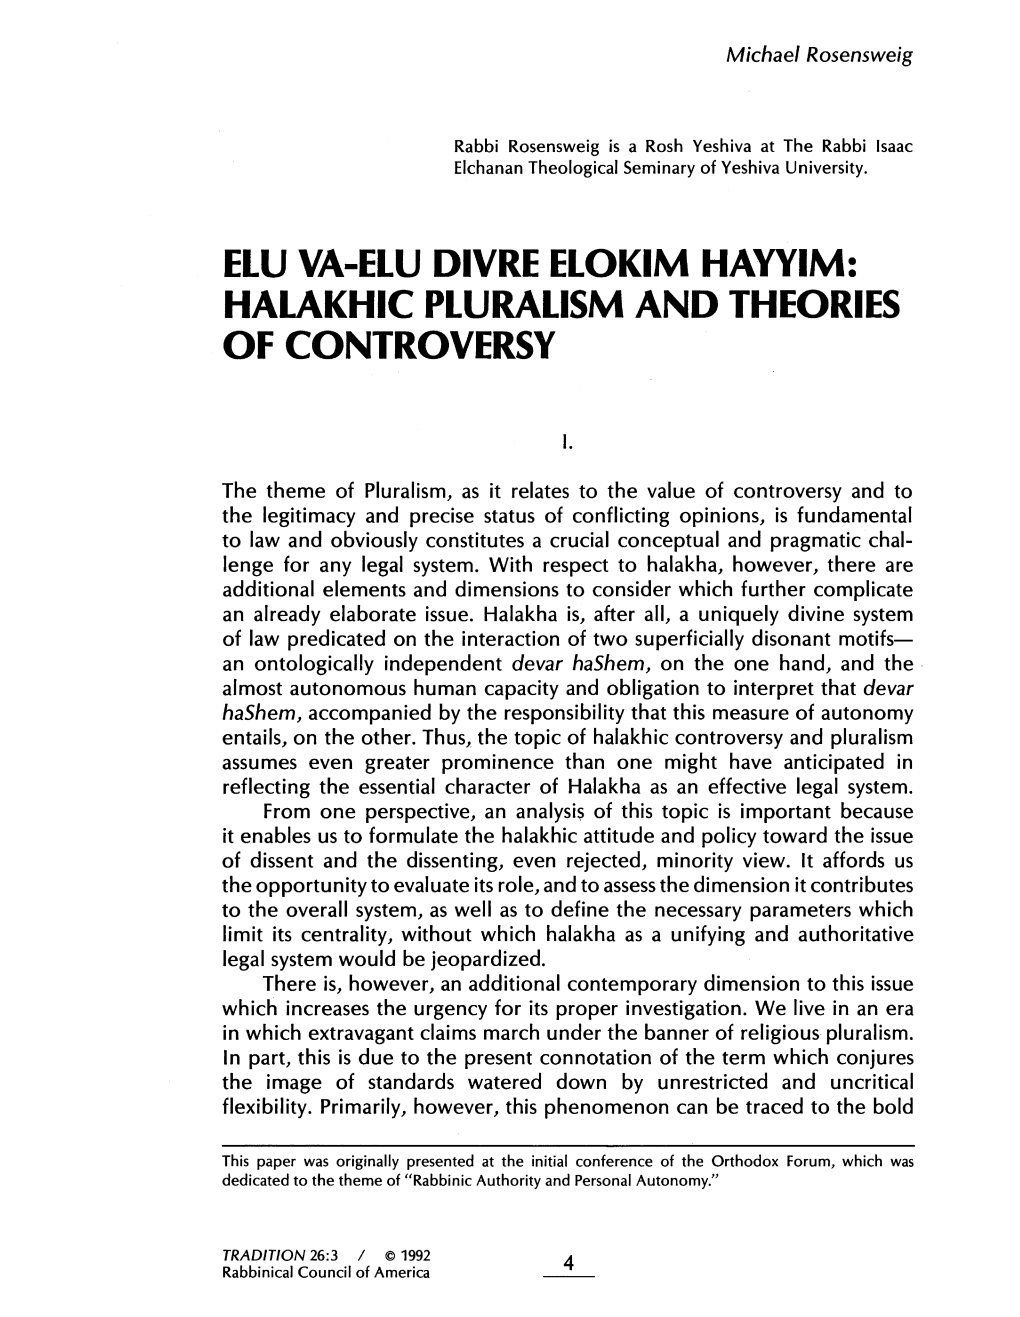 Halakhic Pluralism and Theories of Controversy